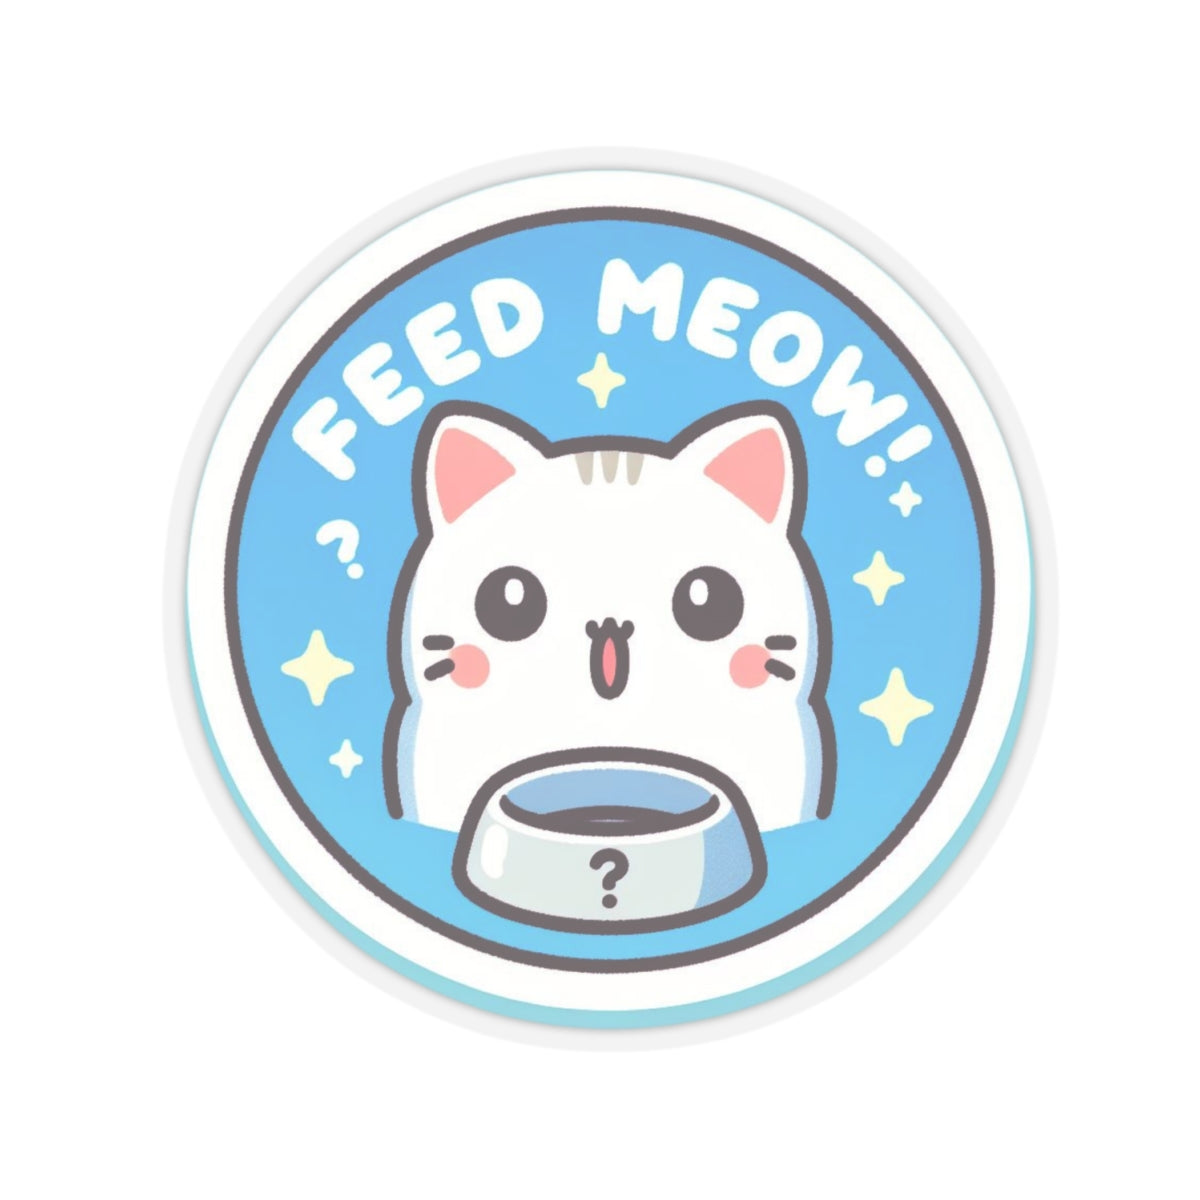 Feed Meow Kiss-Cut Stickers